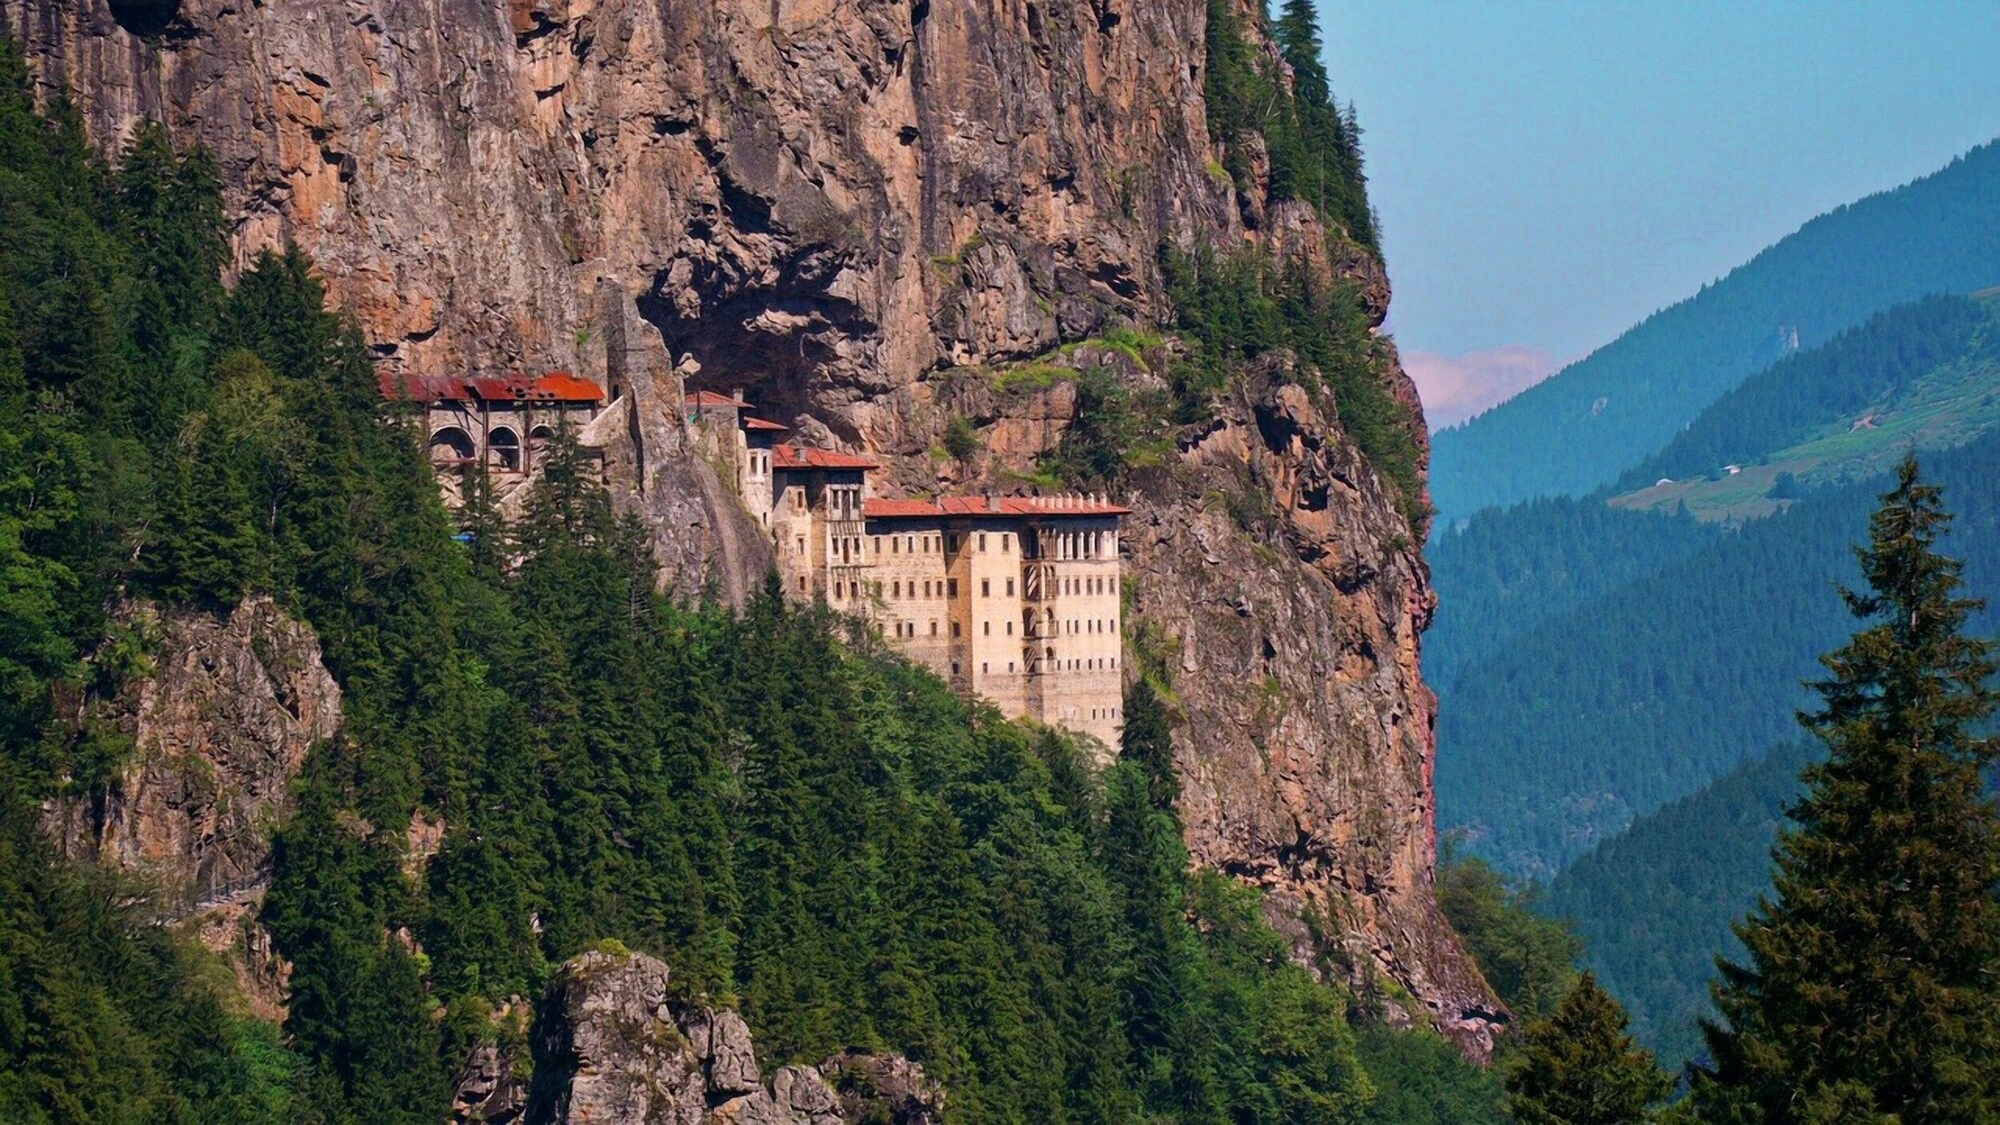 How to Travel to Sumela Monastery, Turkey - A Complete Backpacking Travel Guide